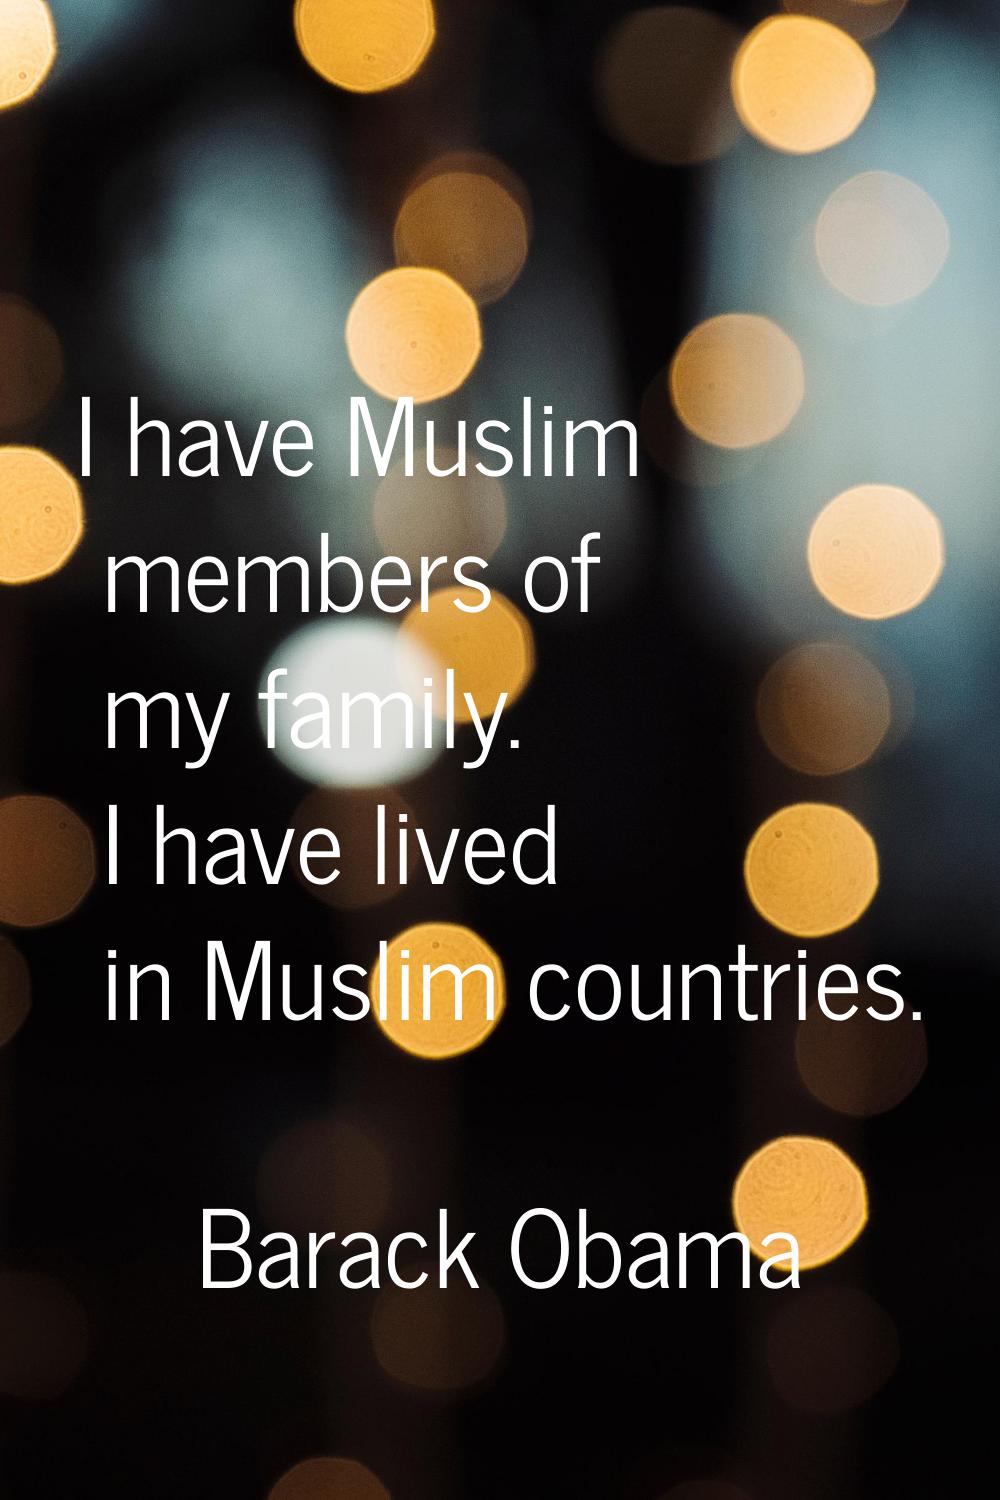 I have Muslim members of my family. I have lived in Muslim countries.